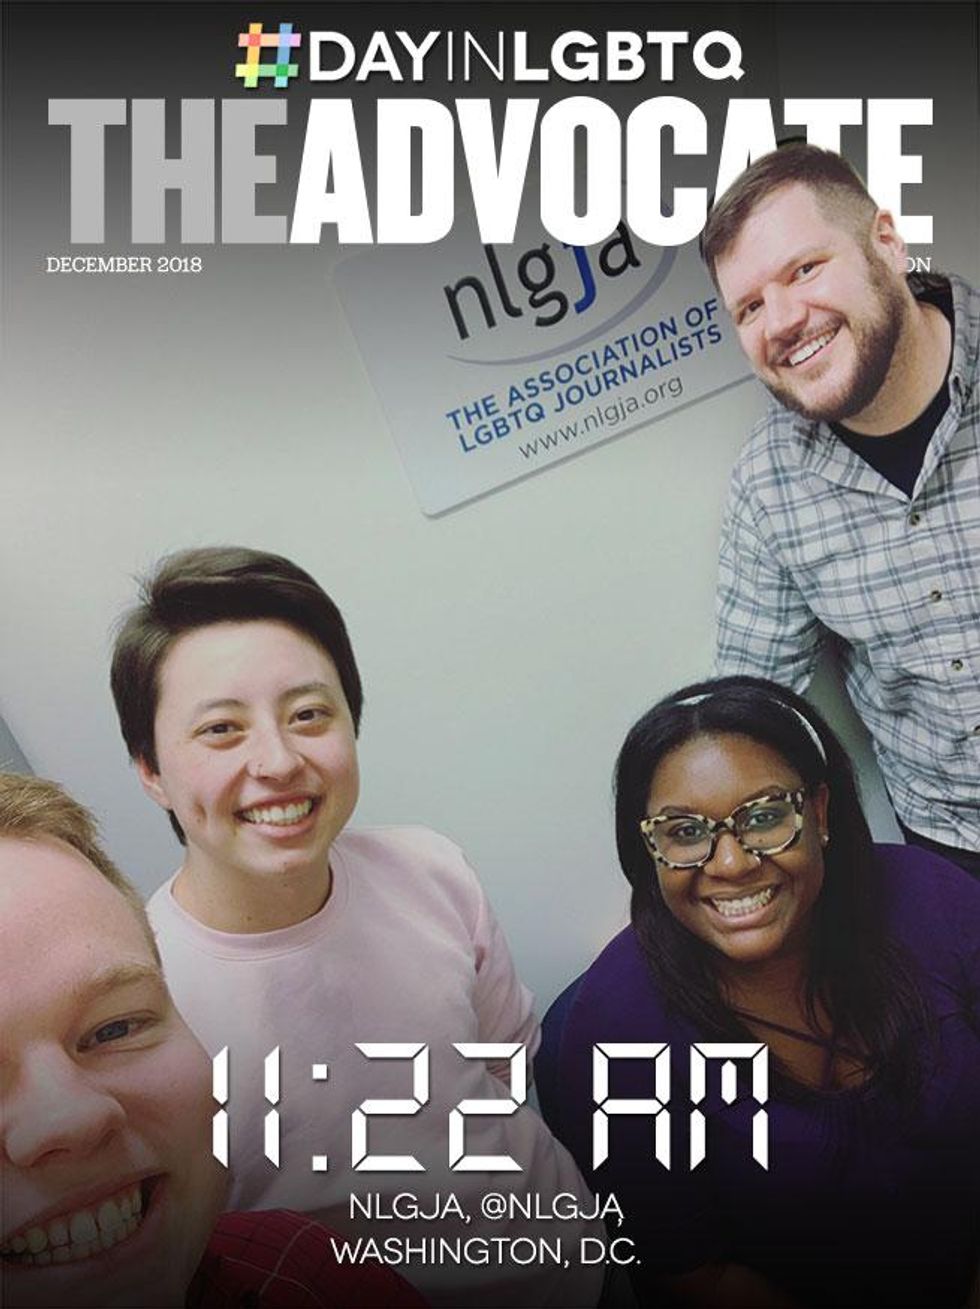 11-22-nlgja-theadvocate-2018-dayinlgbt-cover-template-655